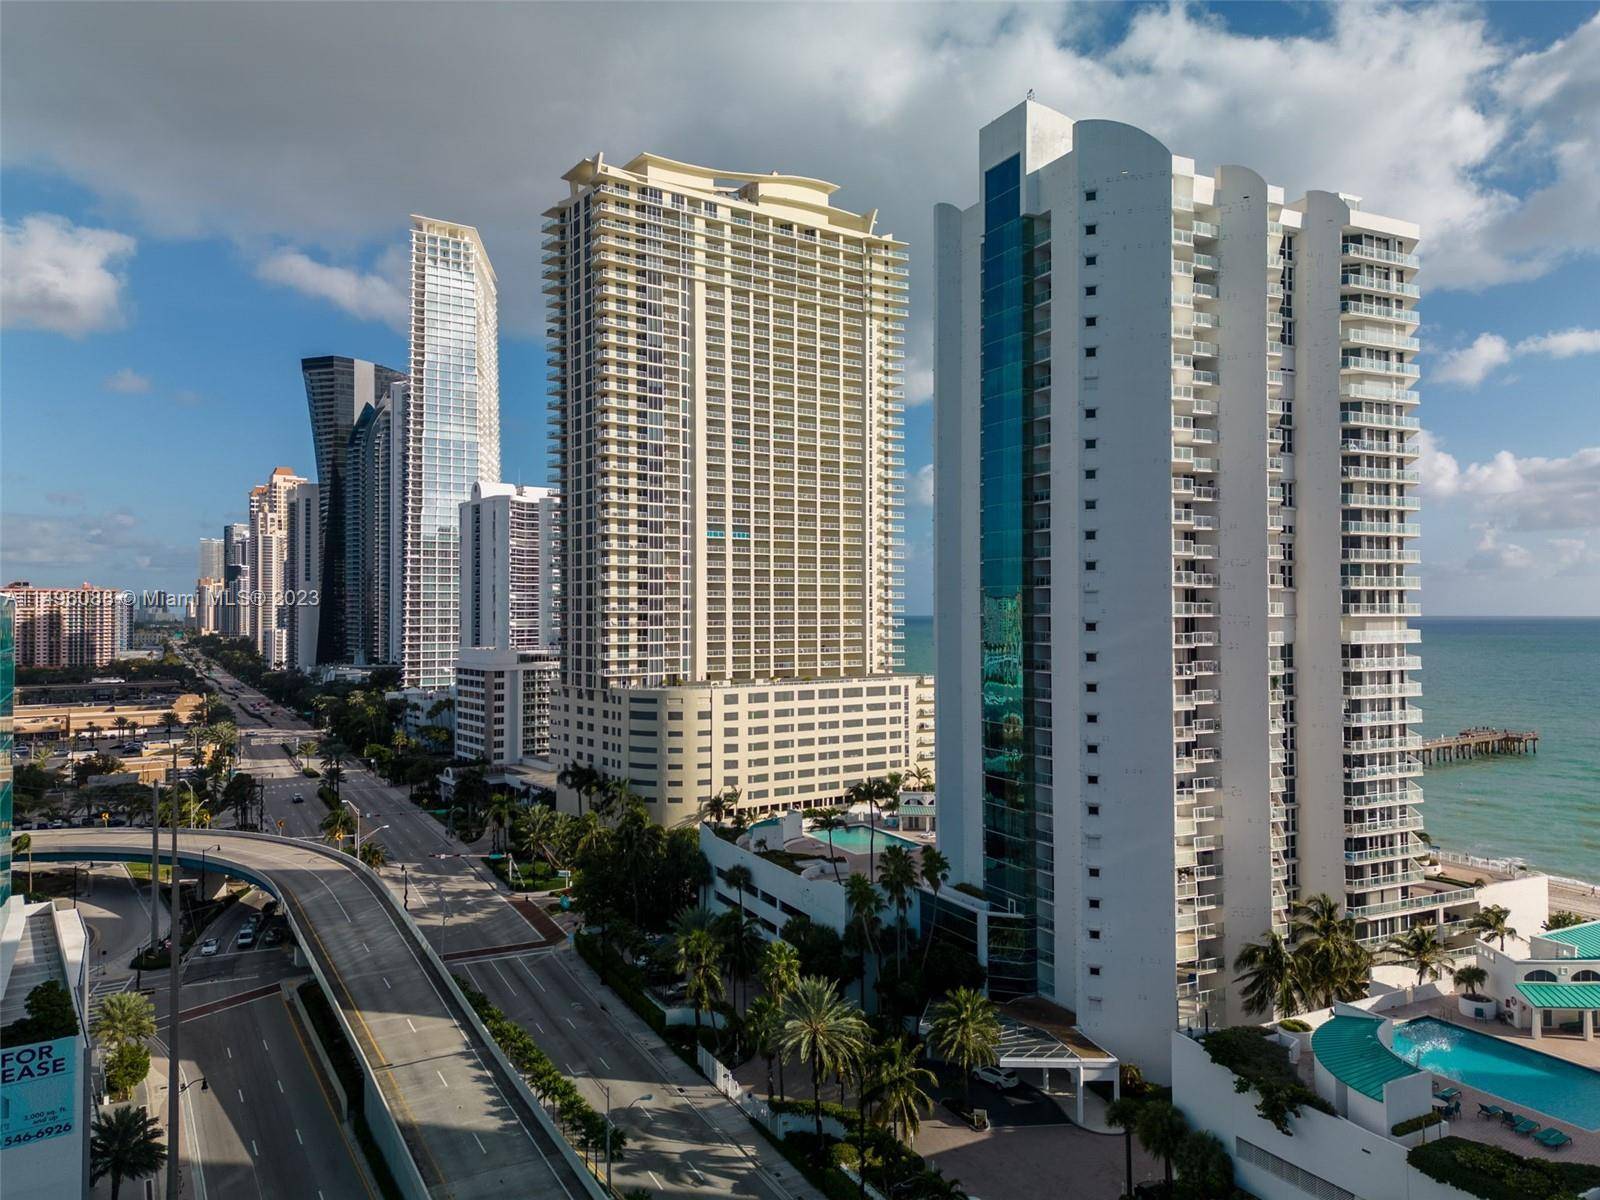 Sunny Isles Beach desirable luxury building Oceania III Community, 2 bedrooms 2 baths, private balcony from every room facing the ocean, full service on the beach chairs and umbrellas state ...